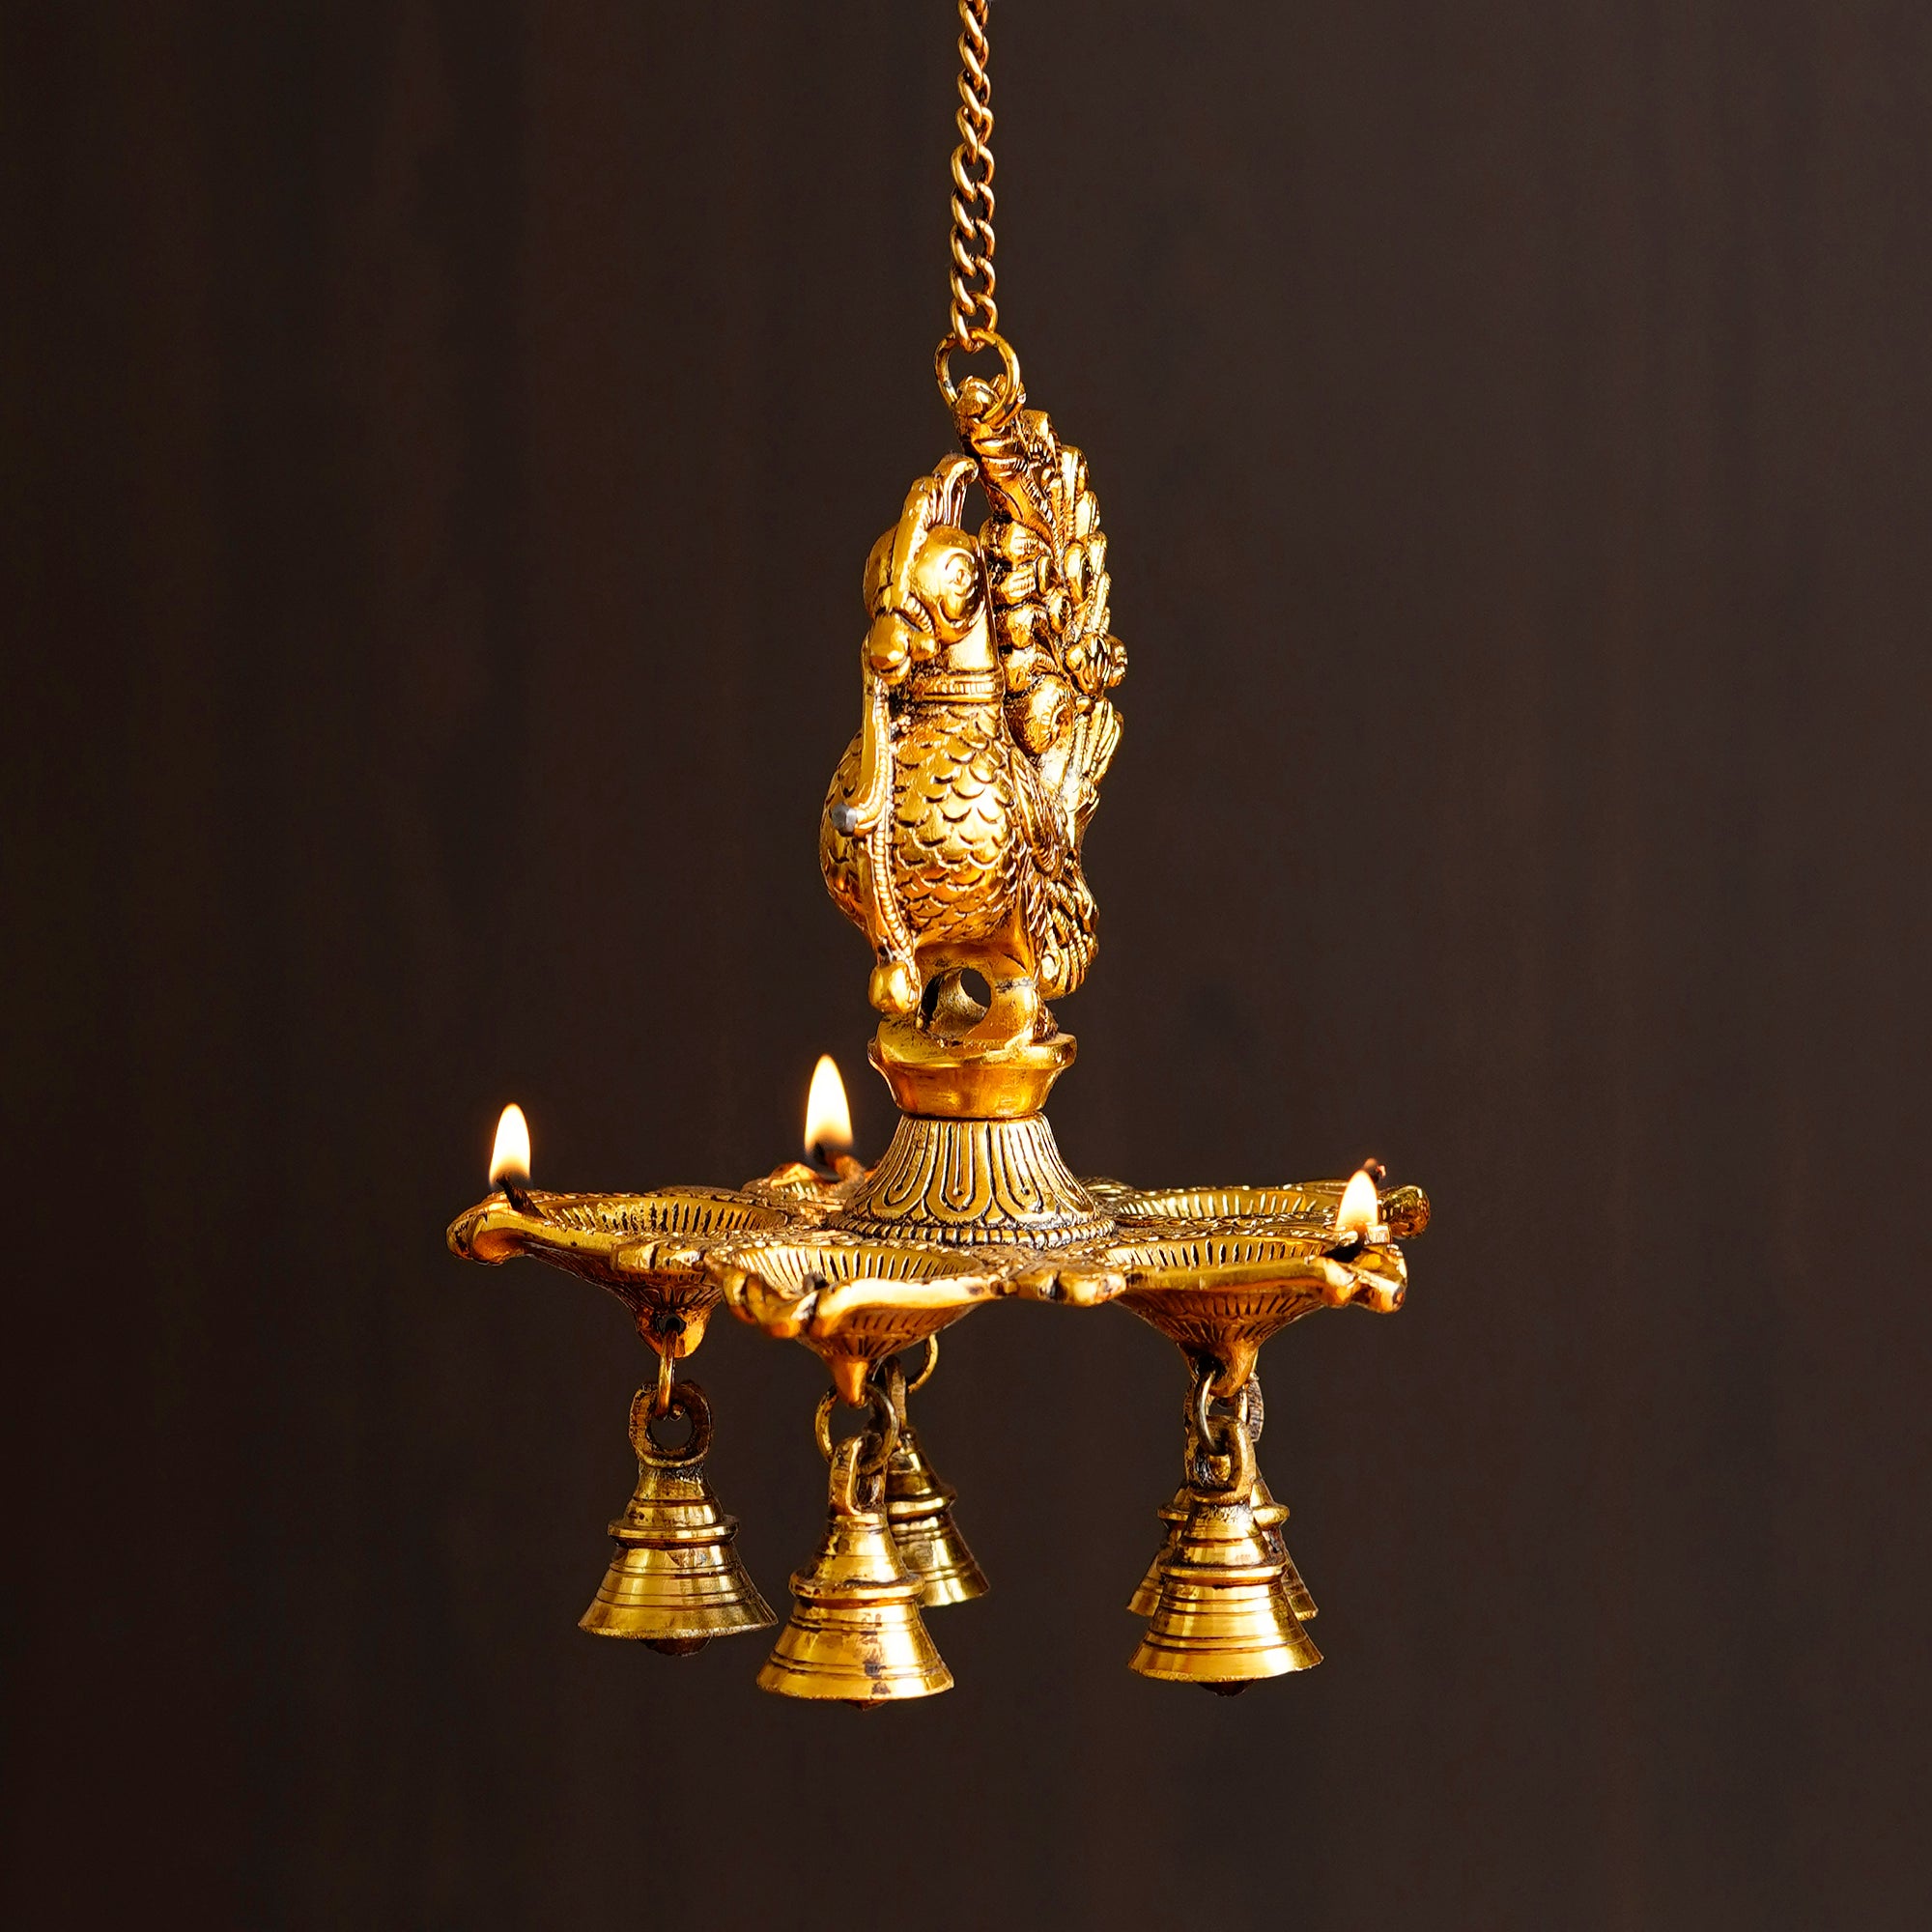 Five Wicks Decorative Peacock Diya With Bell Metal Wall Hanging With Chain 1